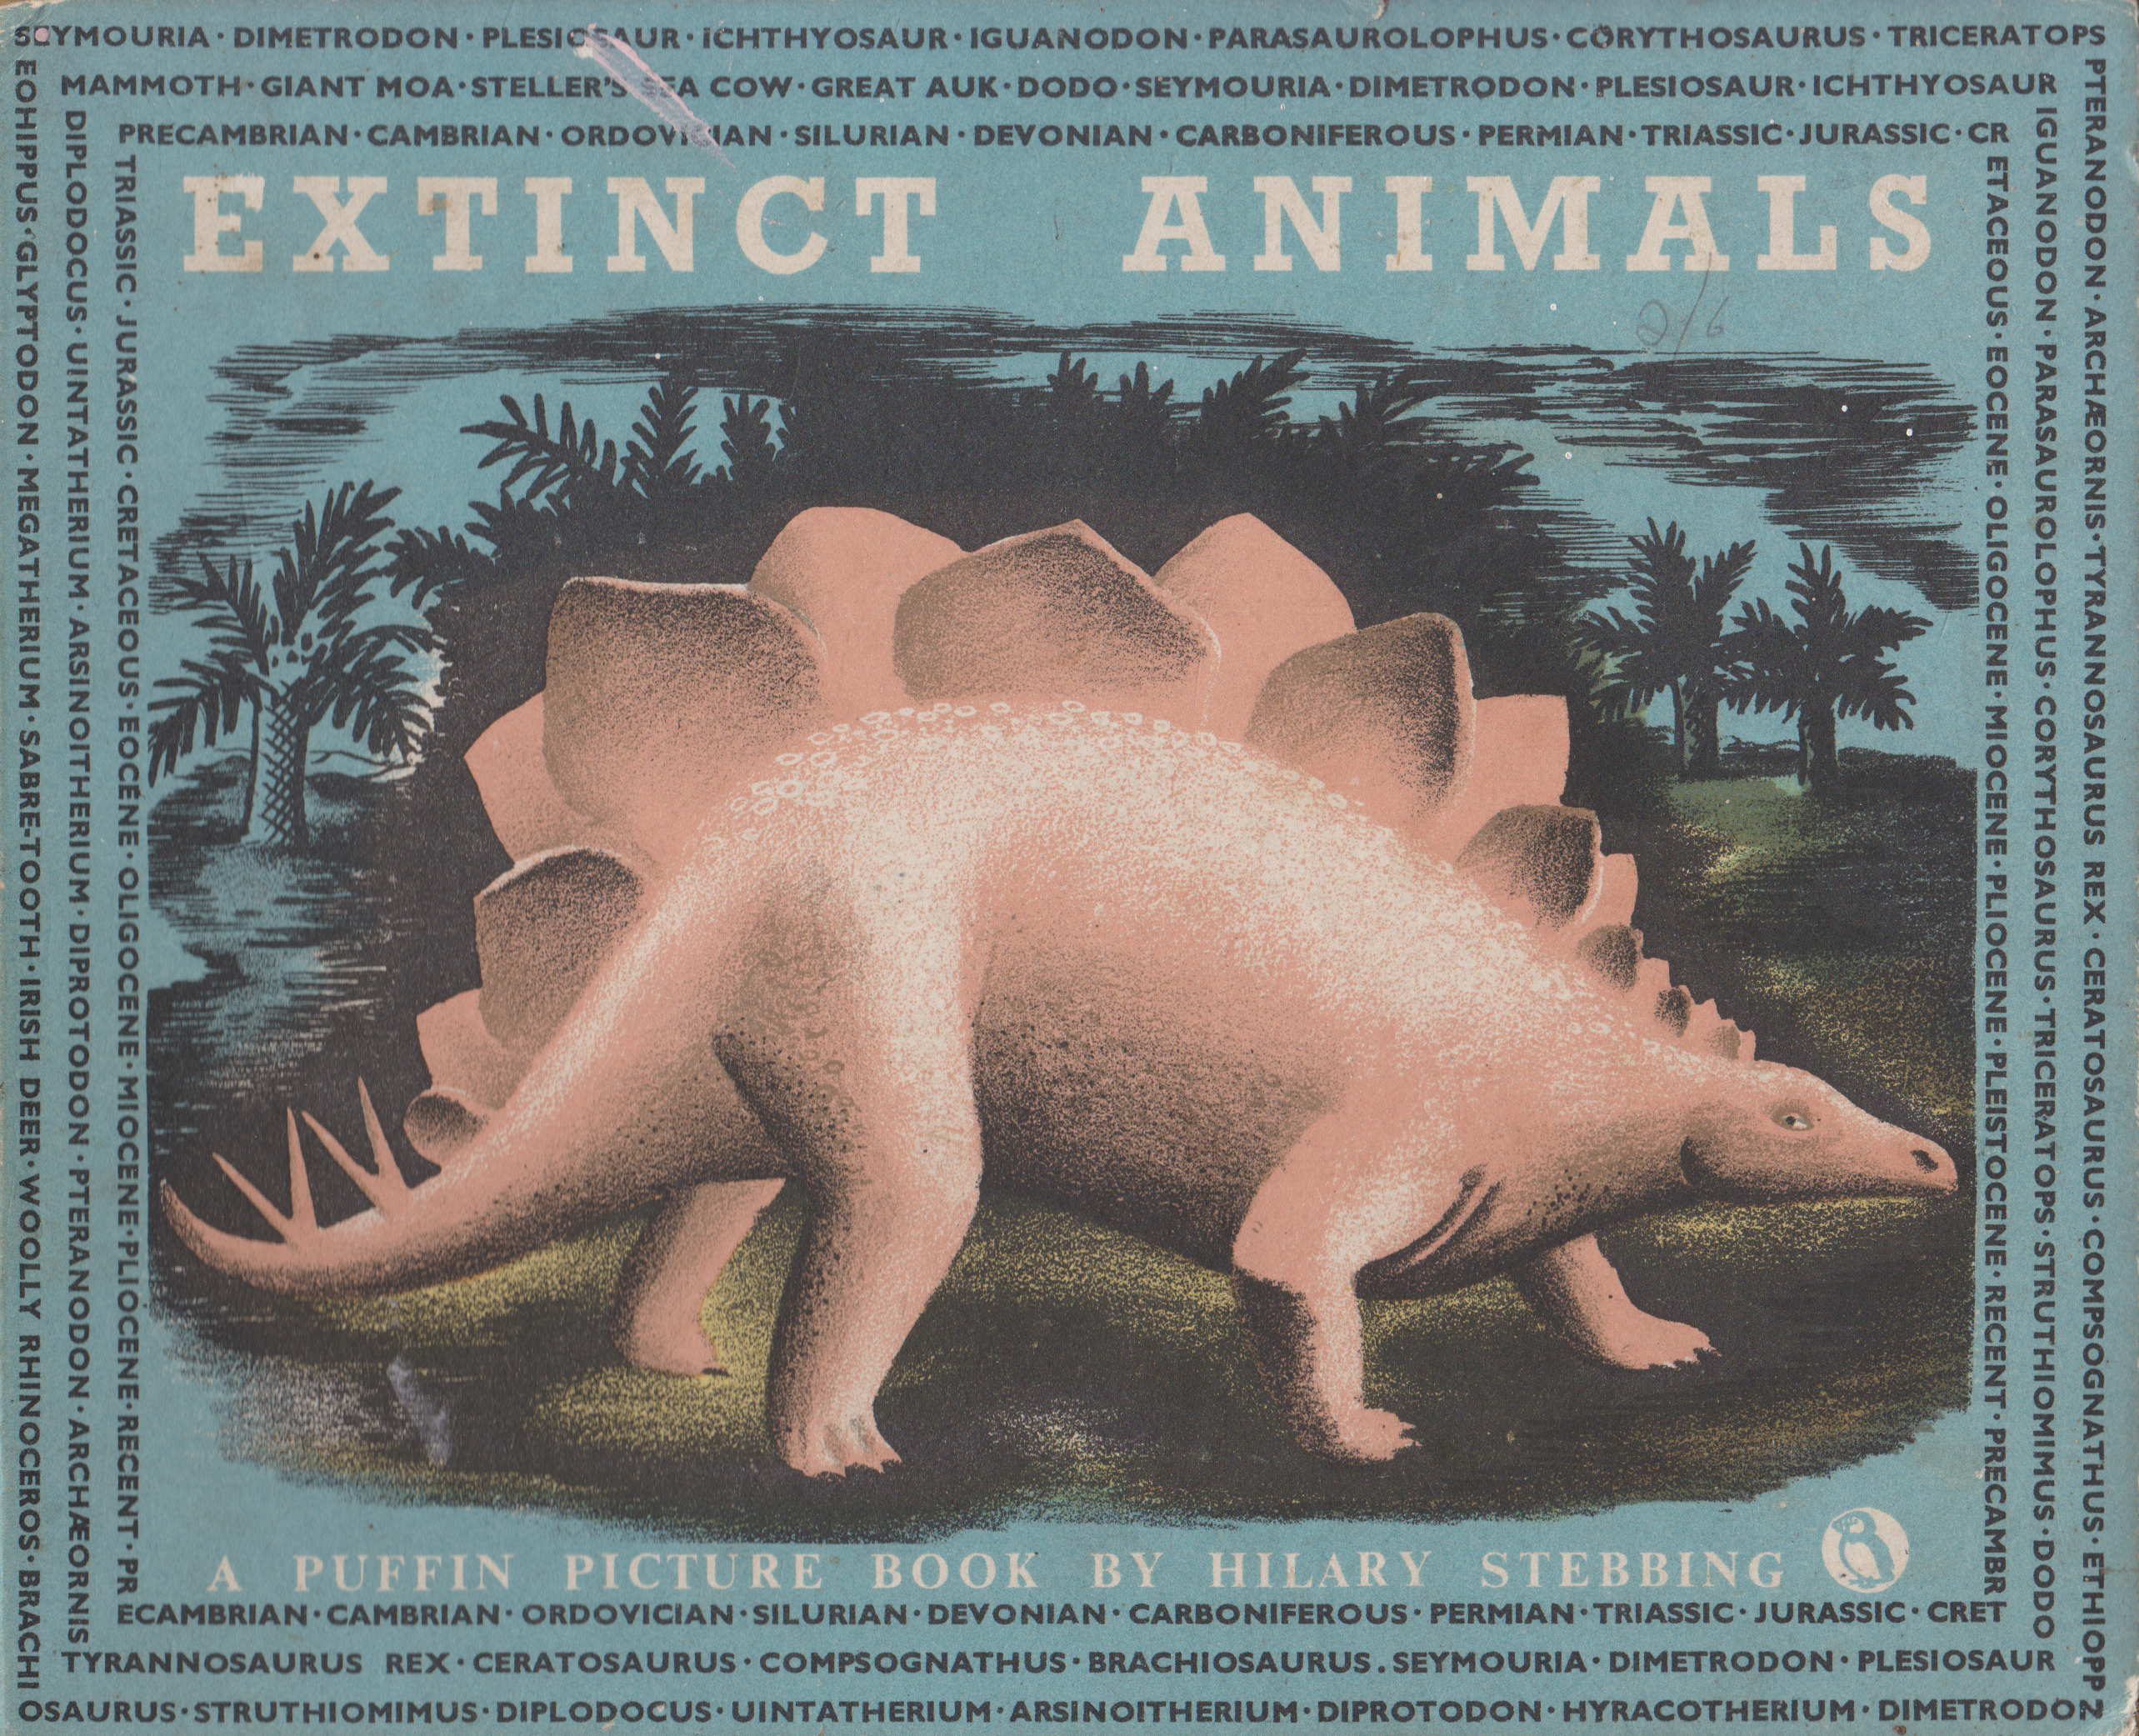 Vintage Dinosaur Art: Extinct Animals – Love in the Time of Chasmosaurs